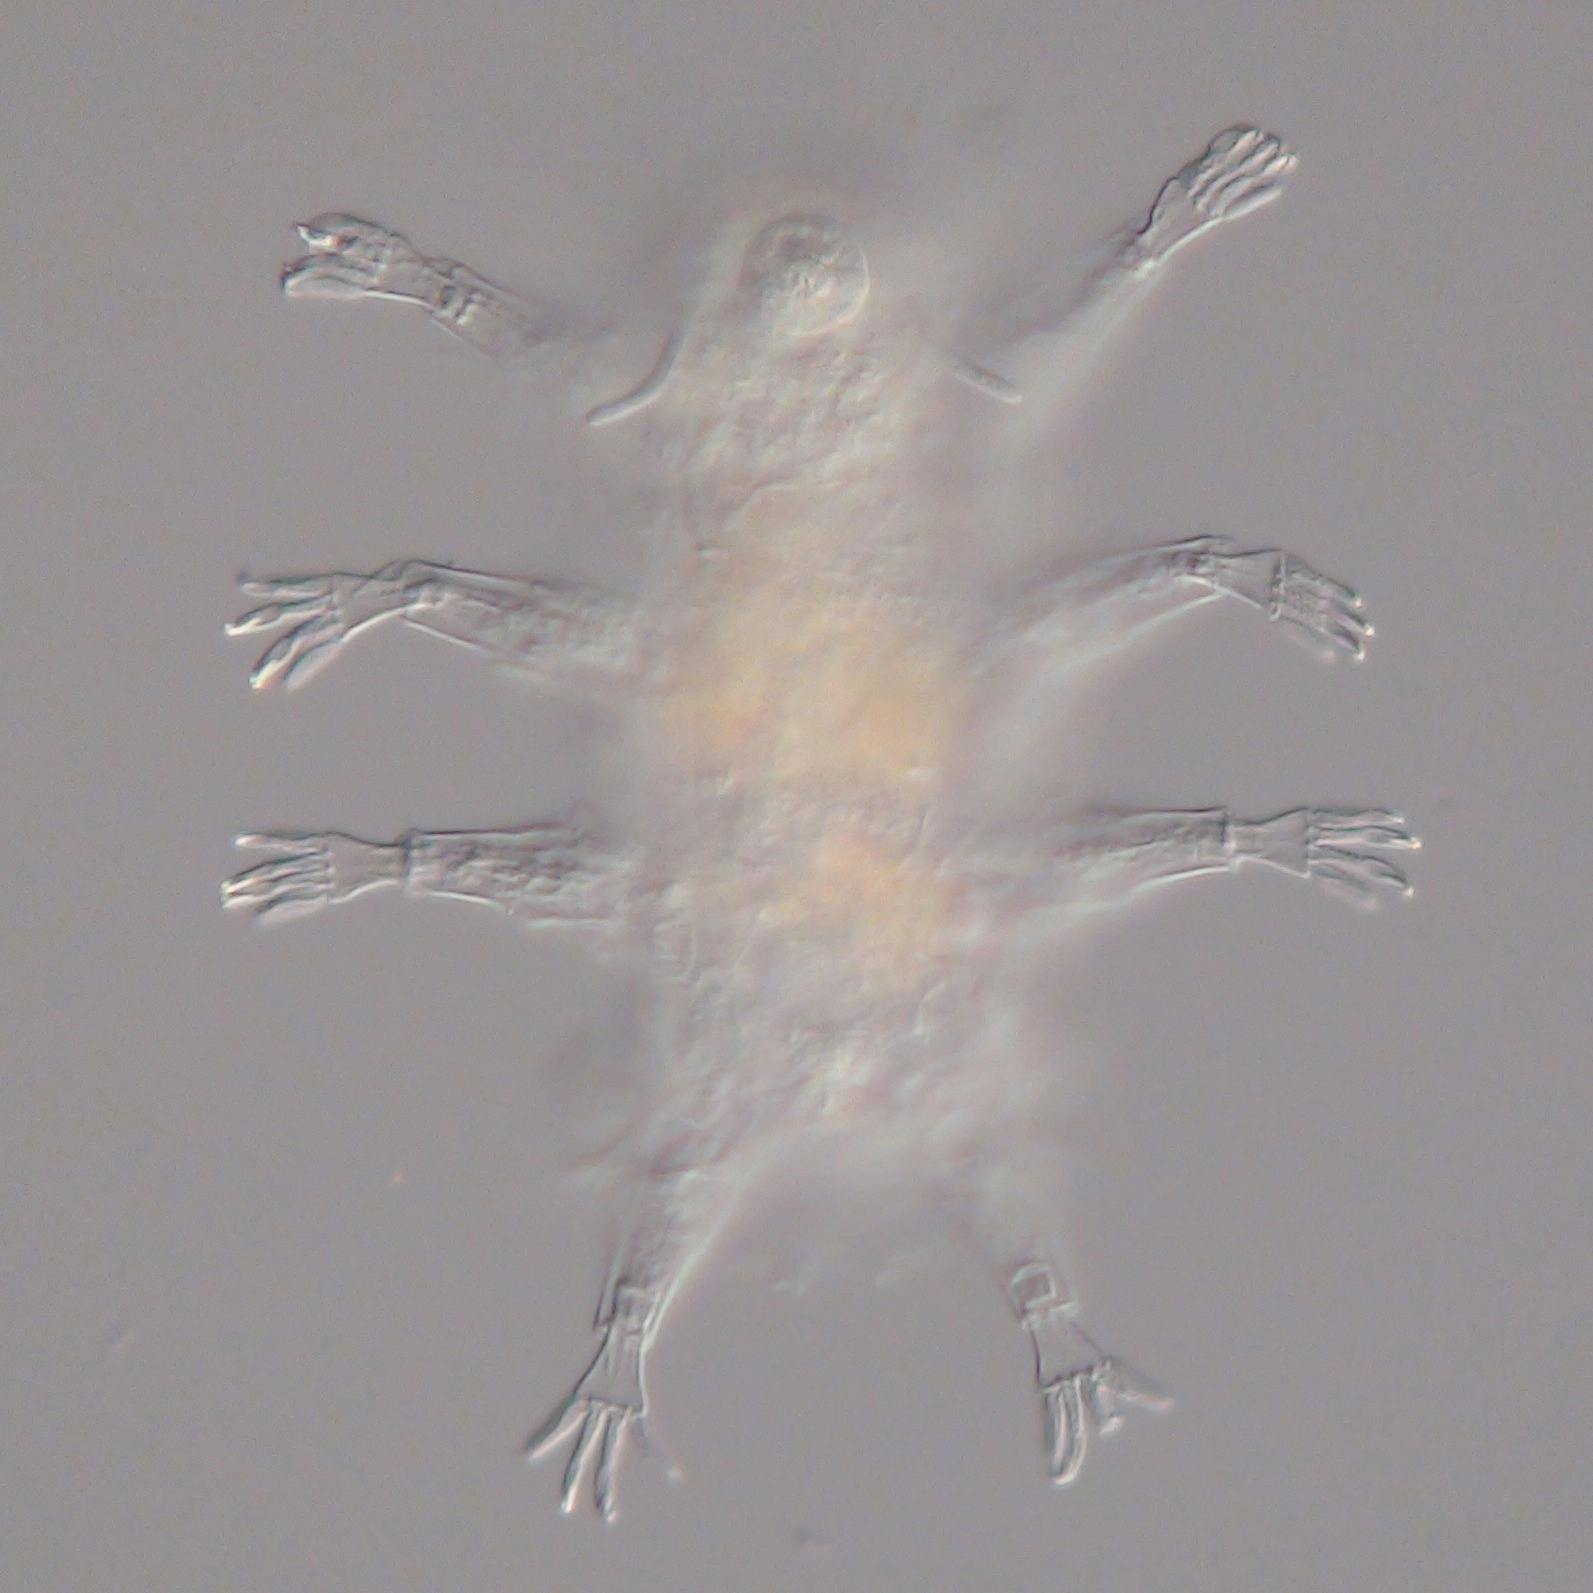 Microscopic image of a translucent tardigrade with detailed view of its extended limbs and transparent body